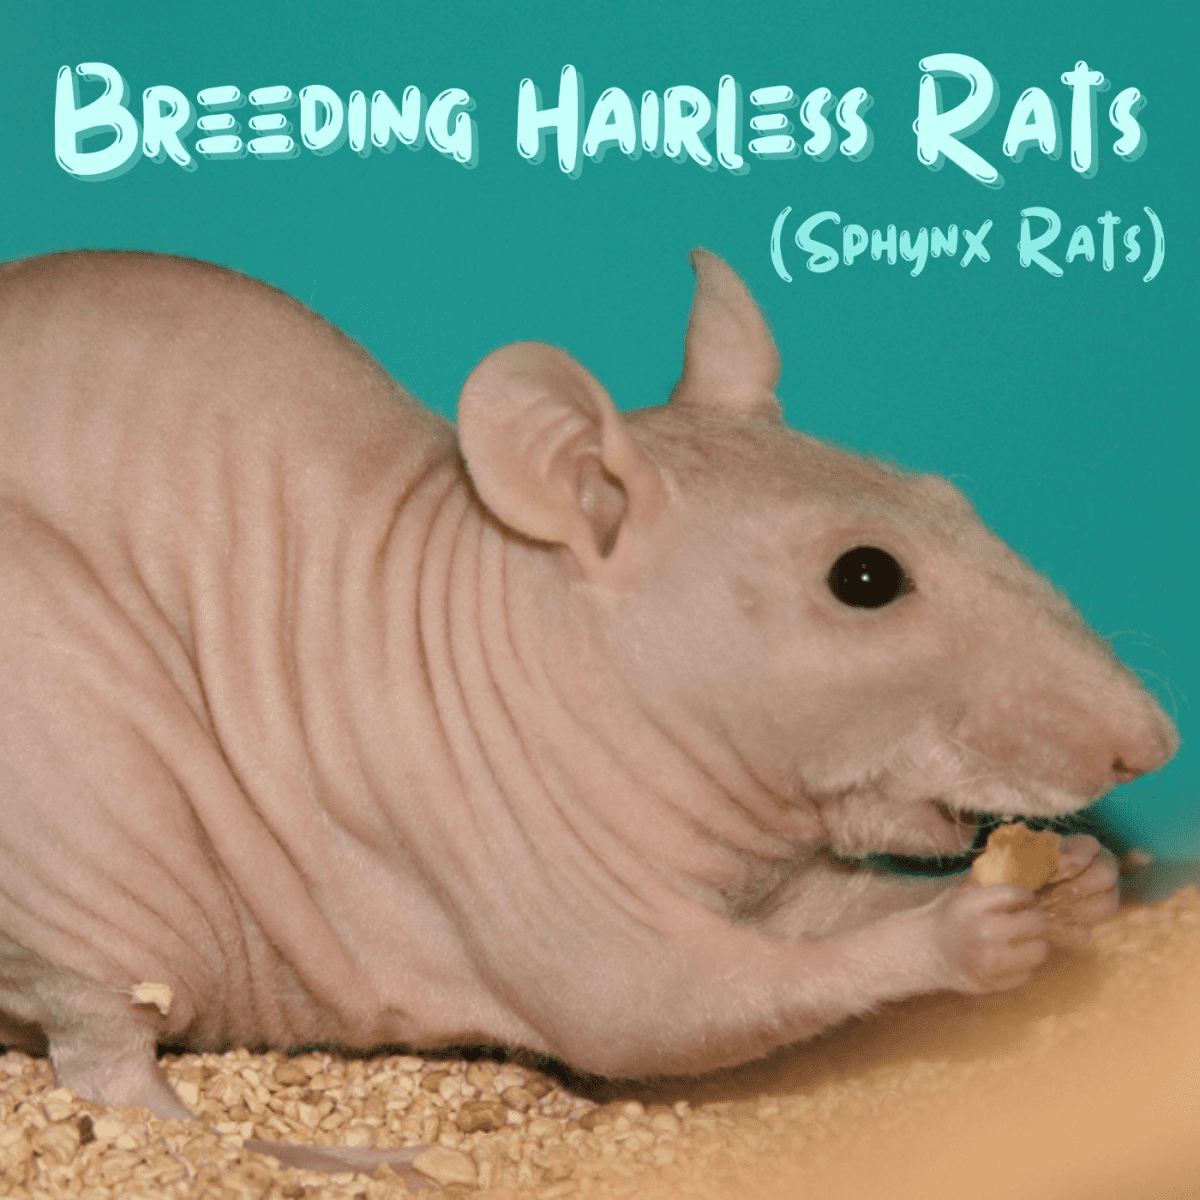 How to Breed Healthy Hairless Rats (Sphynx Rats) - PetHelpful